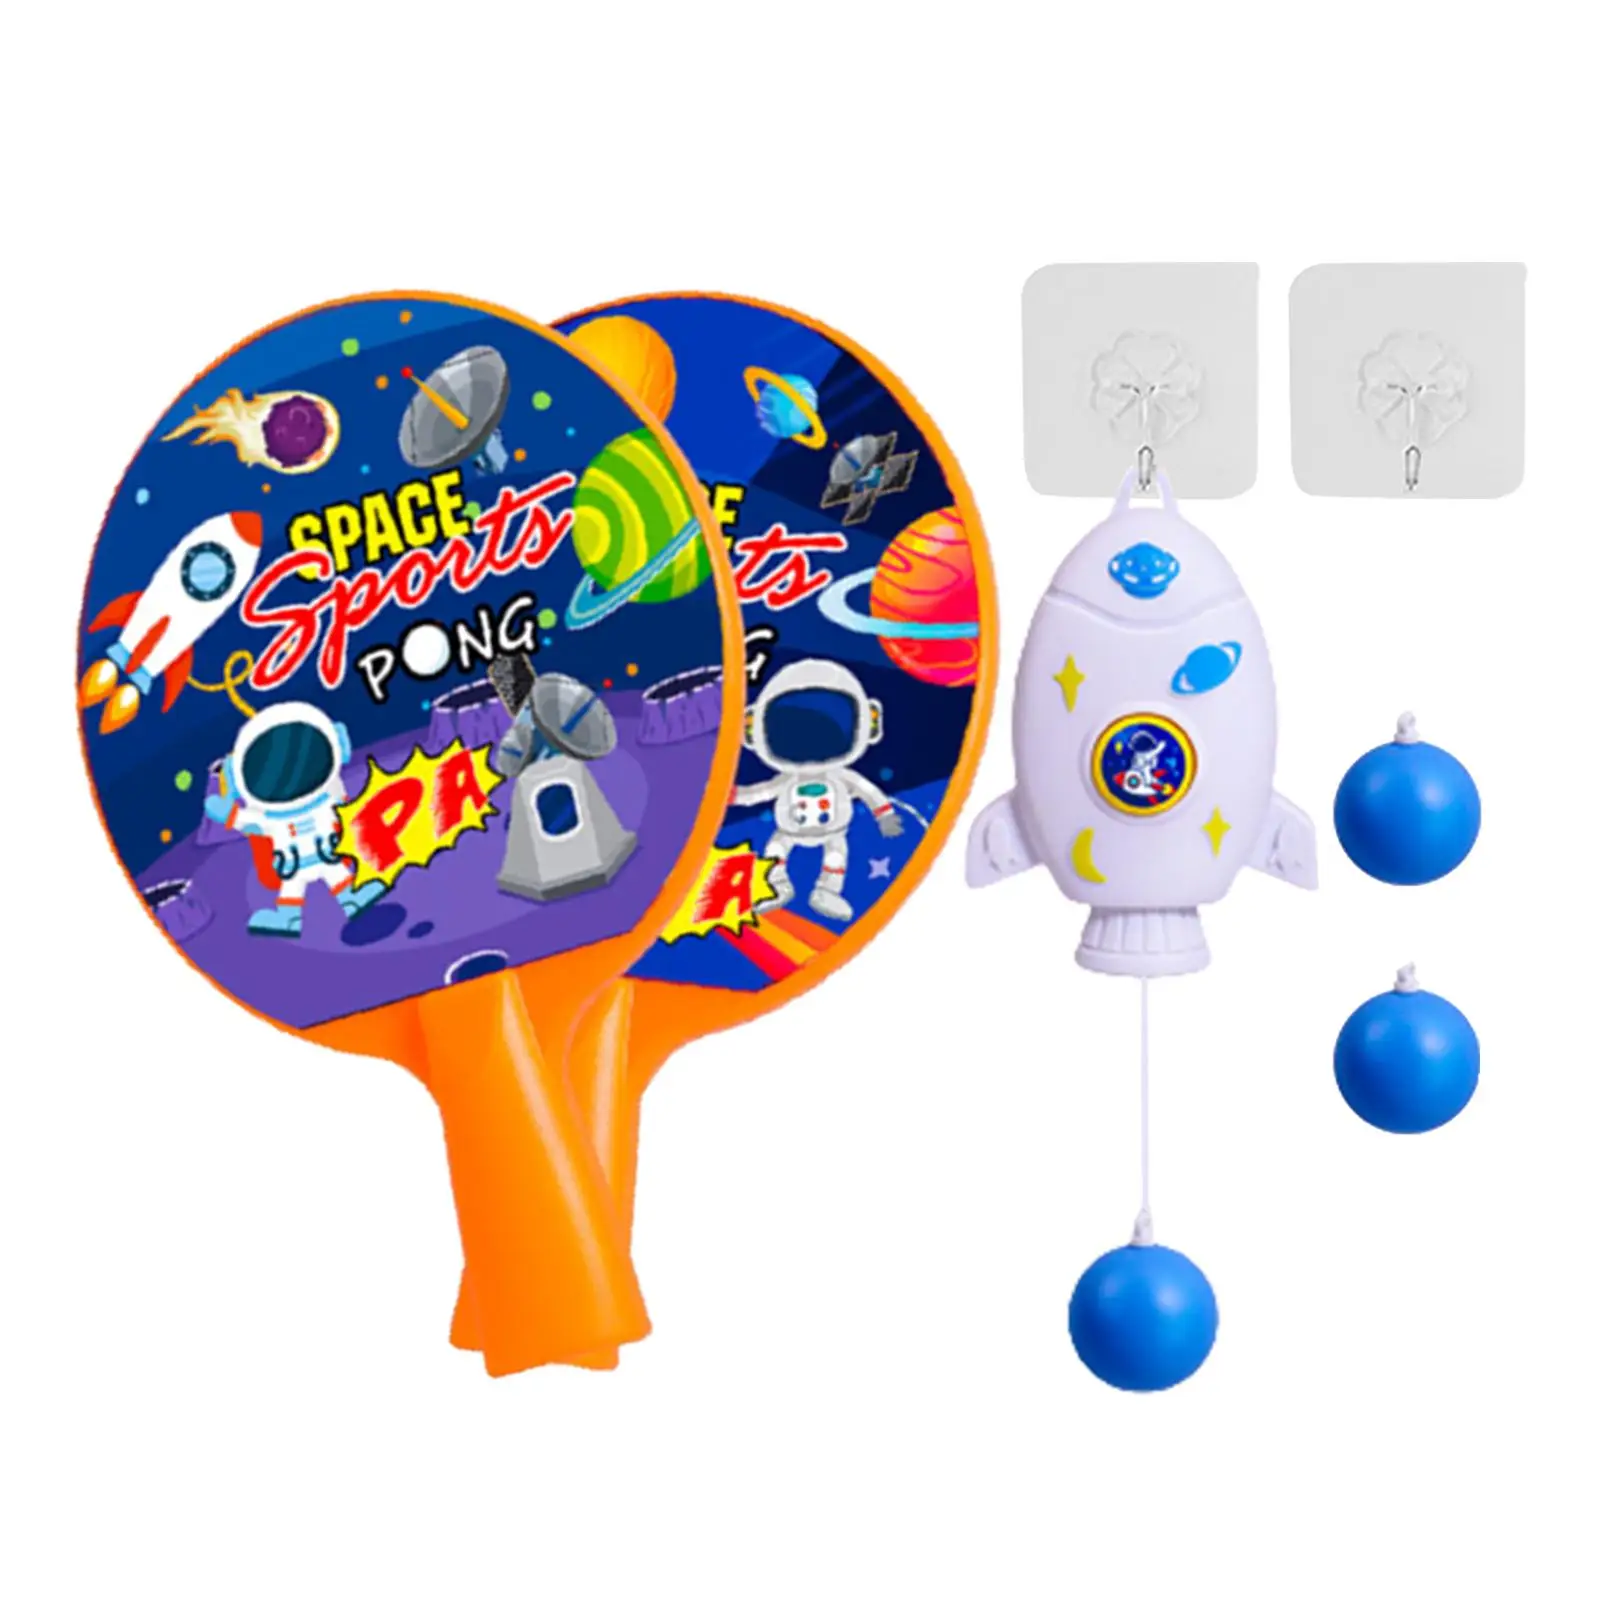 Hanging Table Tennis Trainer for Door Frame Hand Eye Coordination Adjustable Height Self Training for Kids Boys Girls